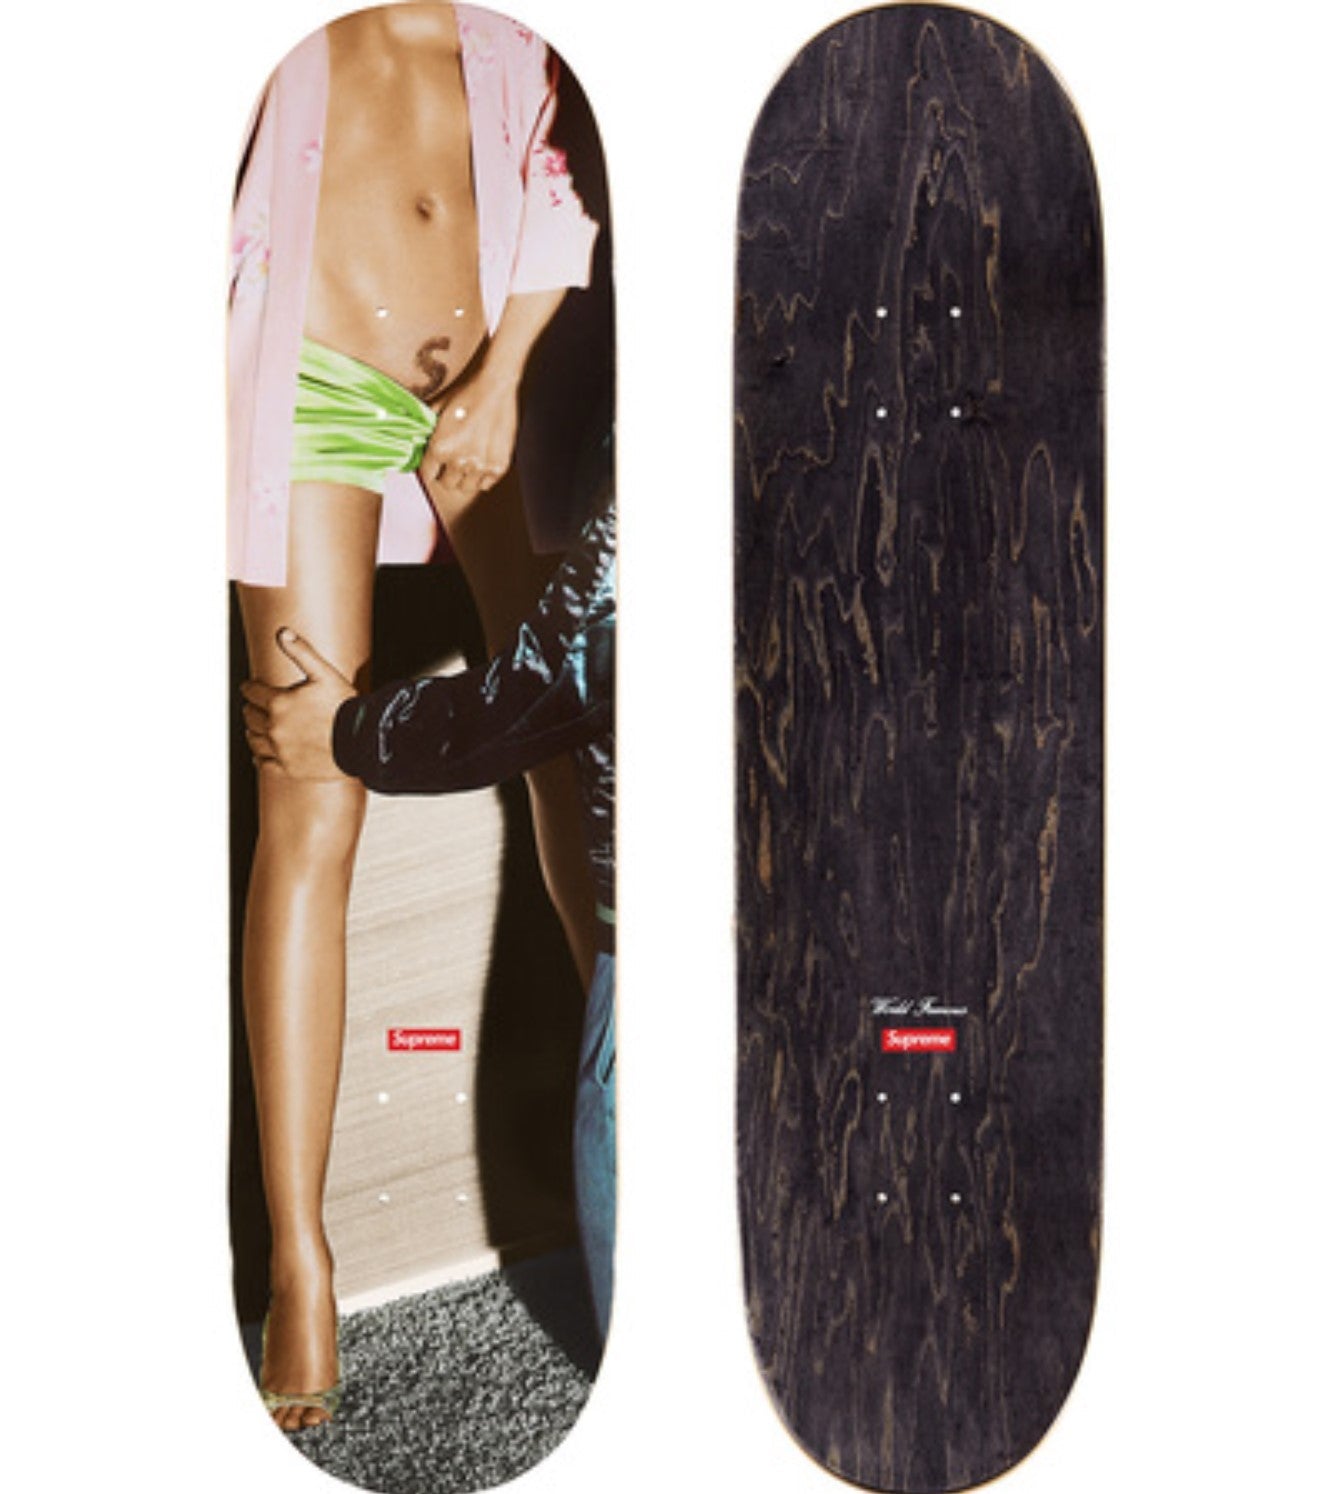 Supreme Skateboards, The Entire Collection